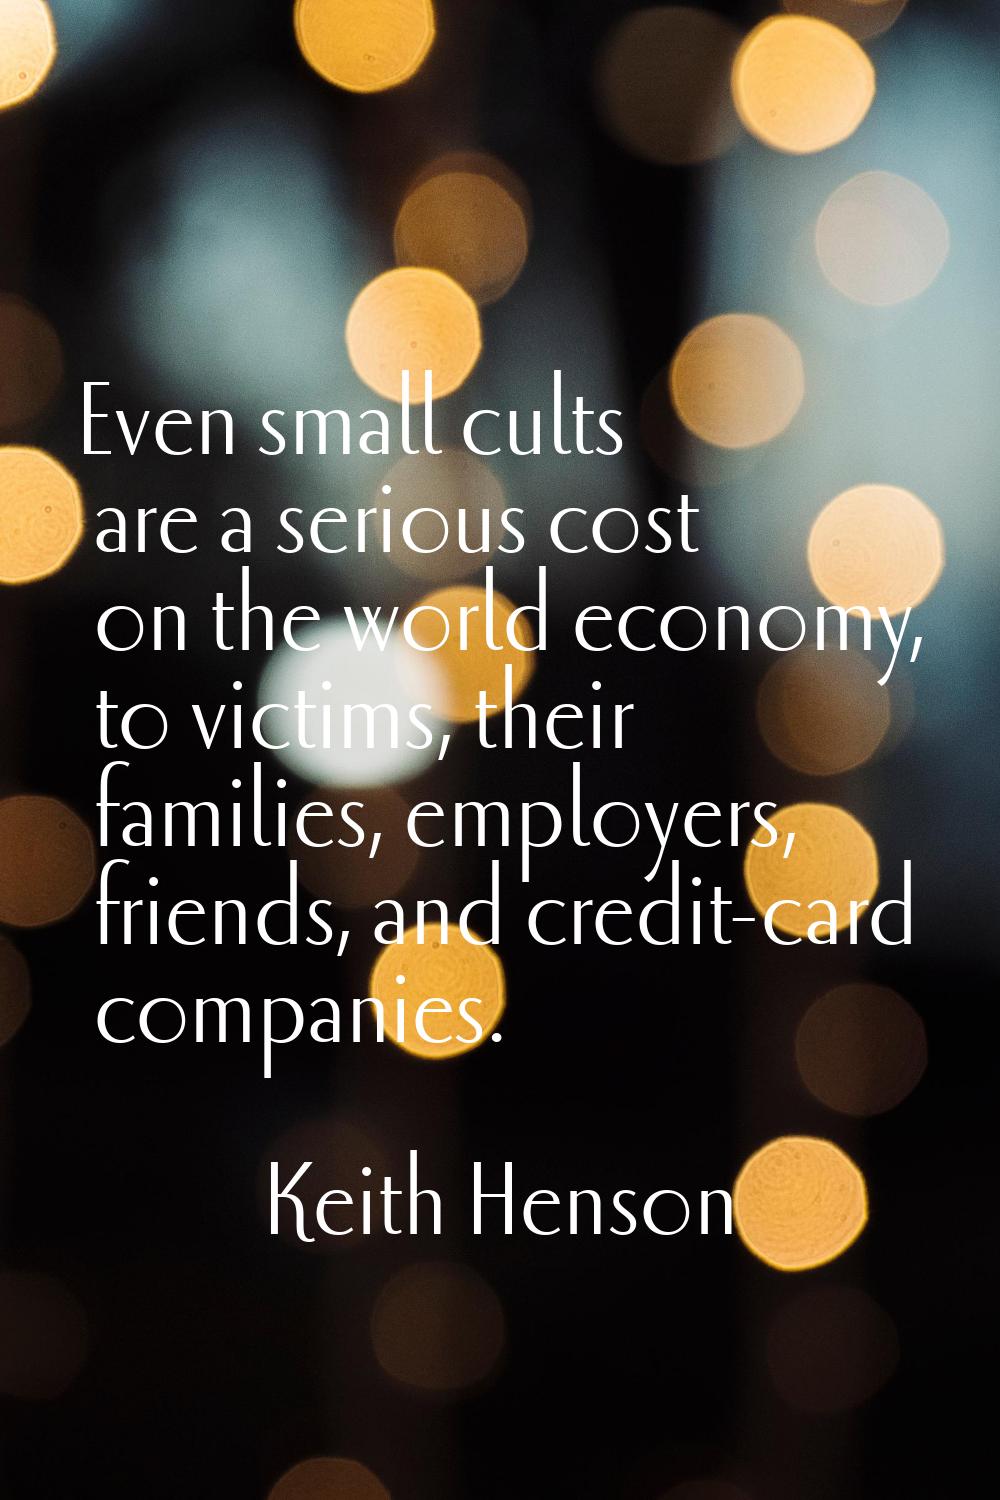 Even small cults are a serious cost on the world economy, to victims, their families, employers, fr